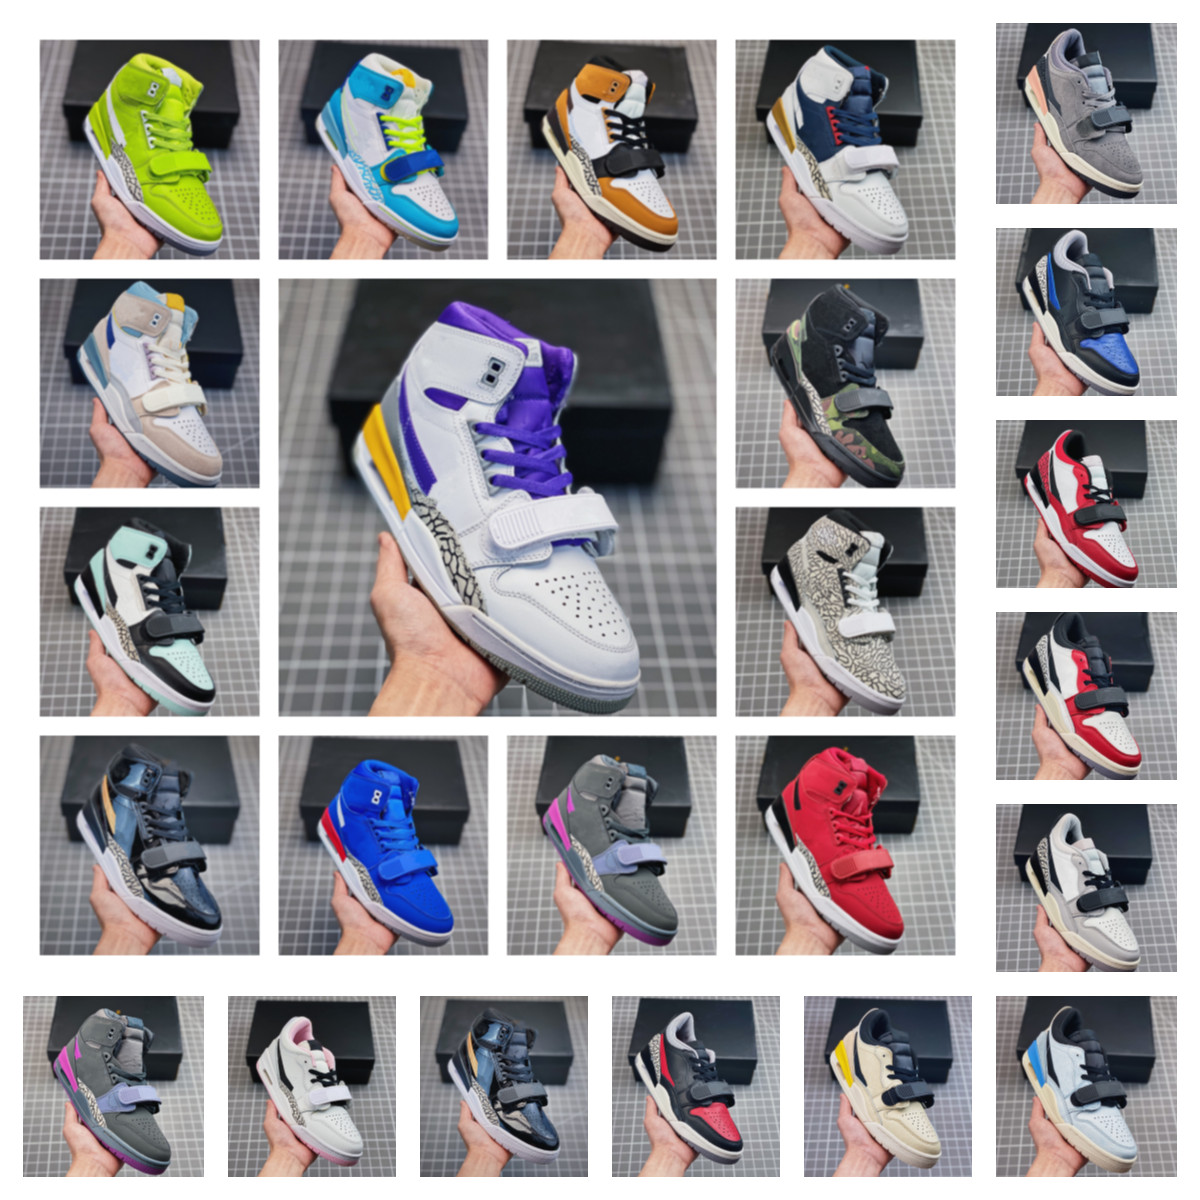 

Jumpman 312 Sneakers 312s Don C x Jumpman Basketball shoe men women Legacy 312 TRAINER 2 Storm Tech Outdoor running Shoes for Mens sports casual Trainers Size 36-46, Do not choose;other color;contact me